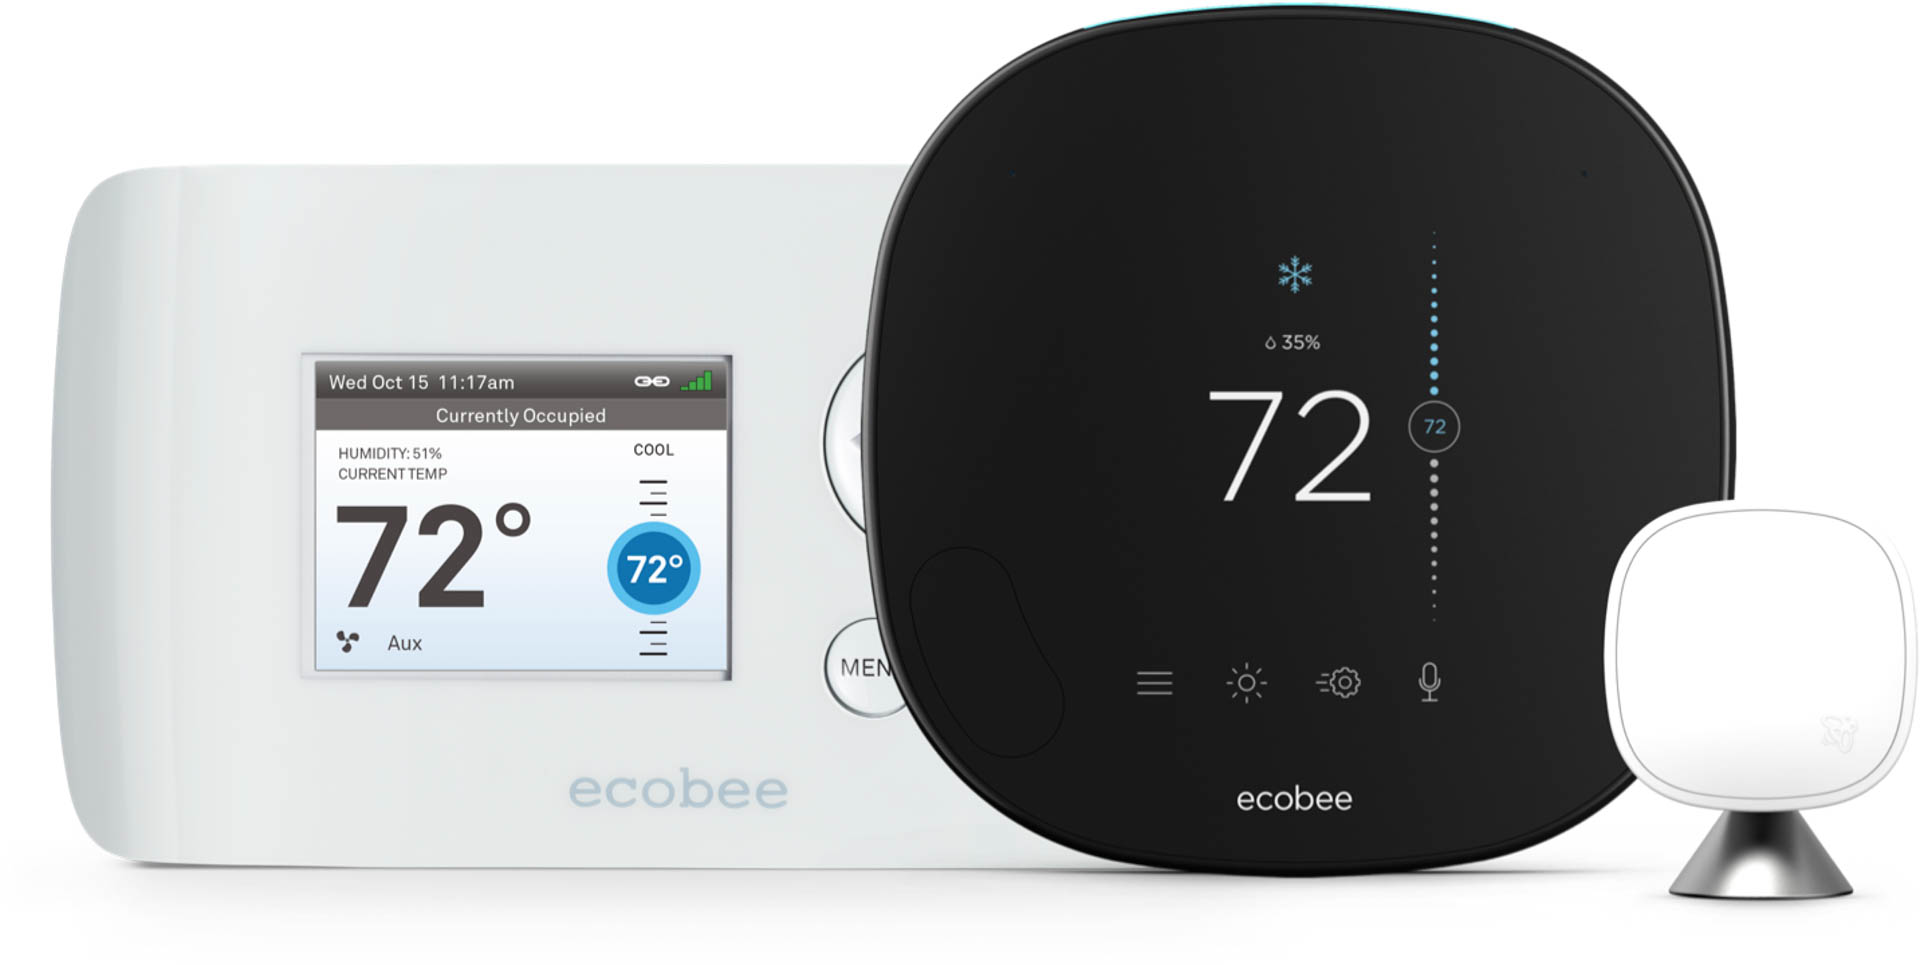 Smart home tech is making its way into rental properties, and is expected by many potential tenants. Image: ecobee.